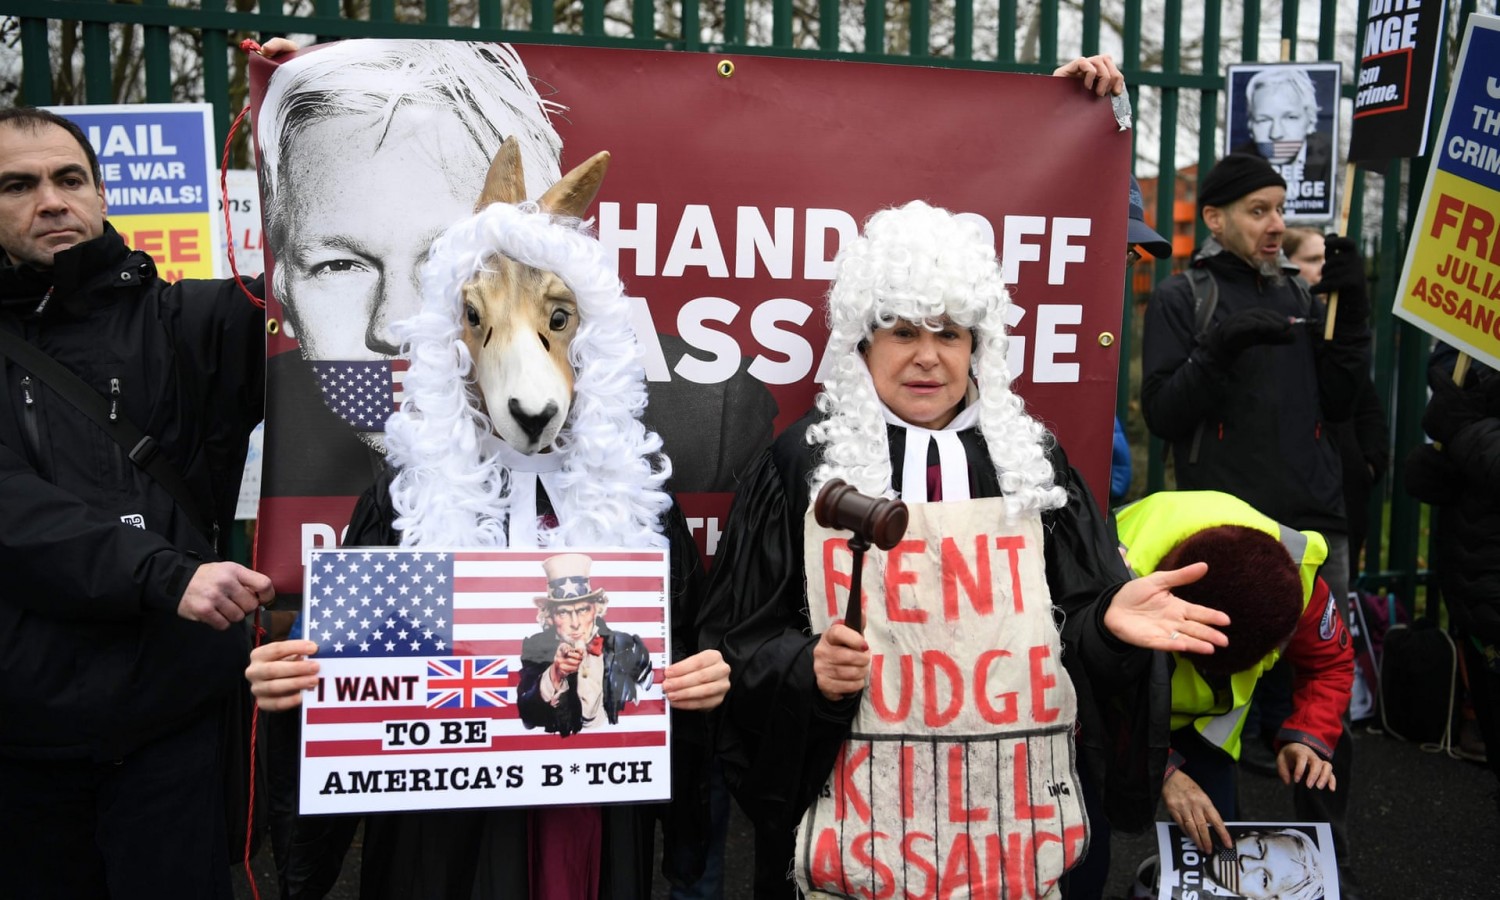  Supporters of Julian Assange call for his freedom outside court. Photograph: Daniel Leal-Olivas/AFP via Getty Images